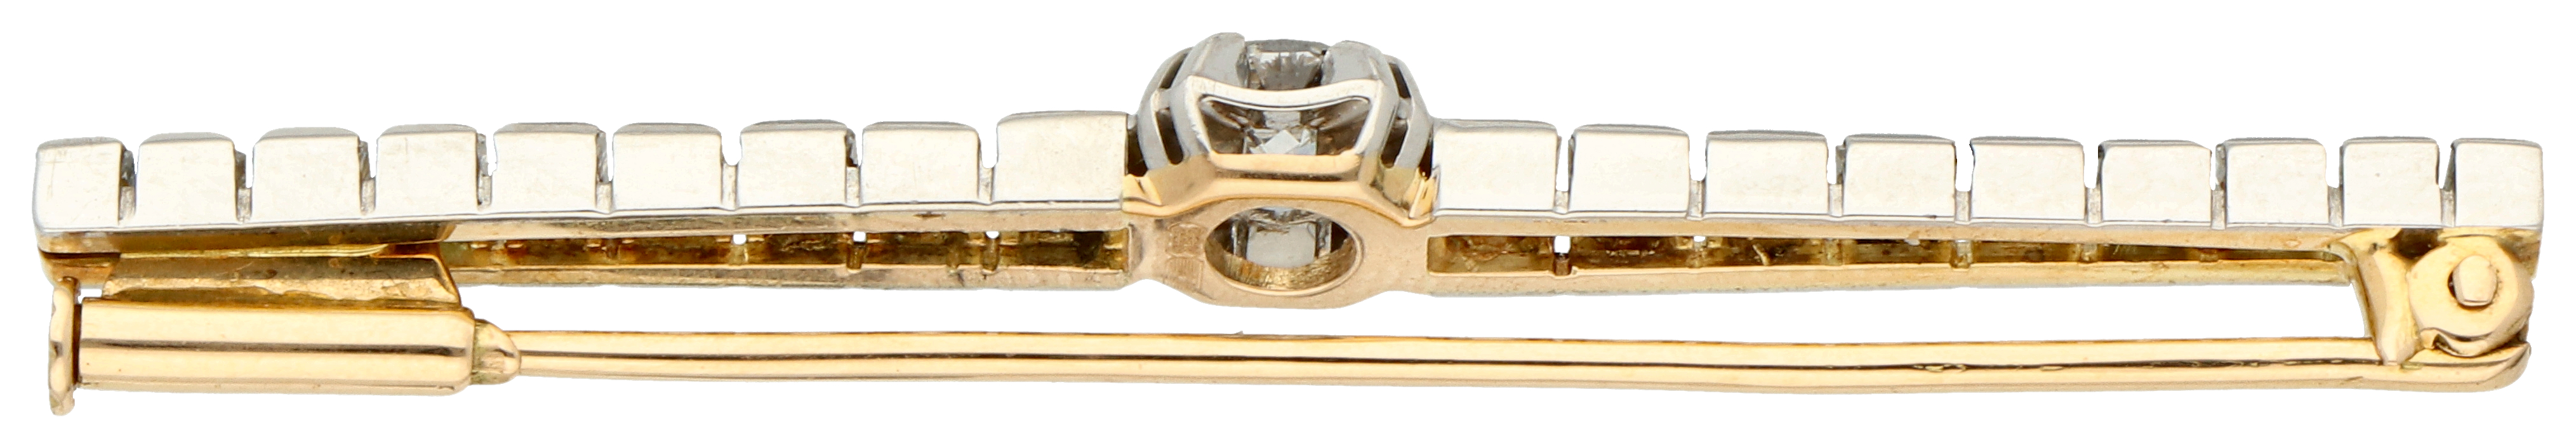 No Reserve - 18k Yellow gold/platinum brooch set with approx. 0.93 ct. diamond. - Image 3 of 3